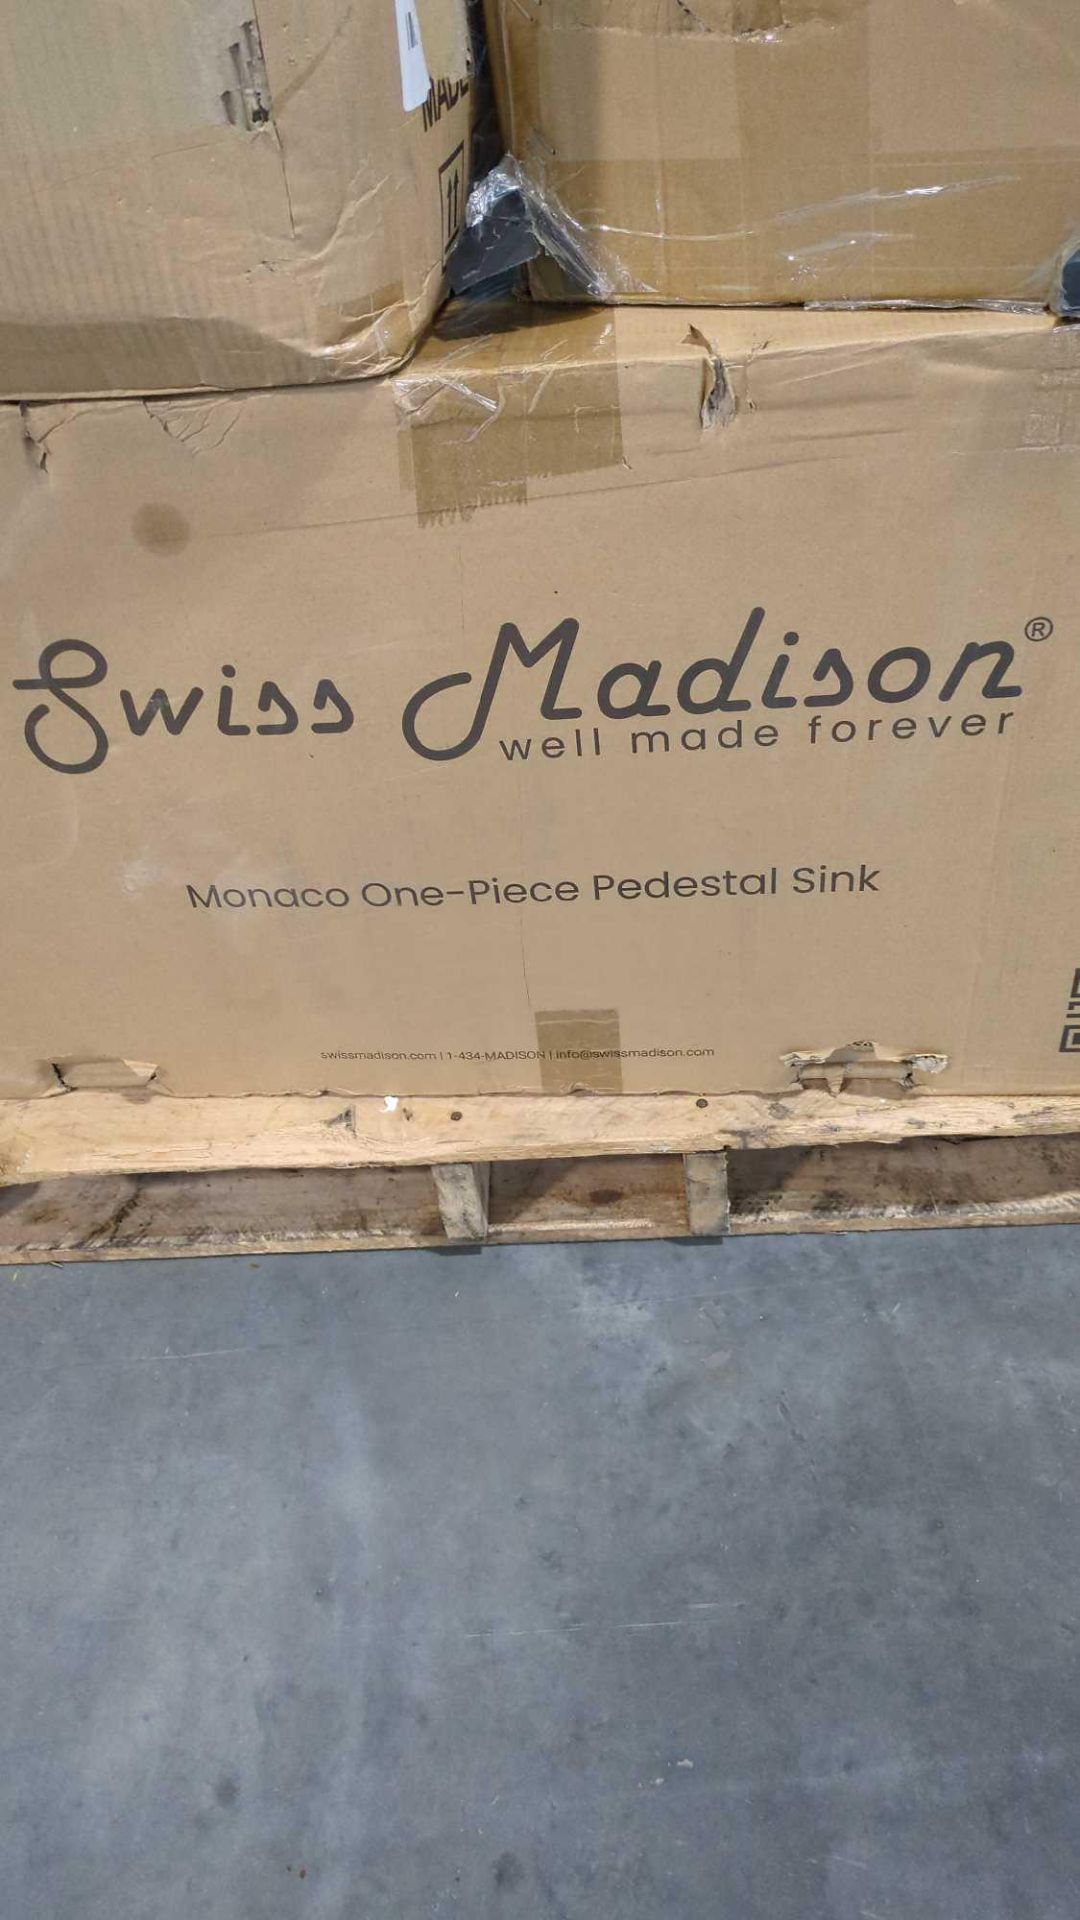 Pallet- Swiss madison pedestal Sink, hand lotions, power box, bedding, tumeric soap, misc shoes and